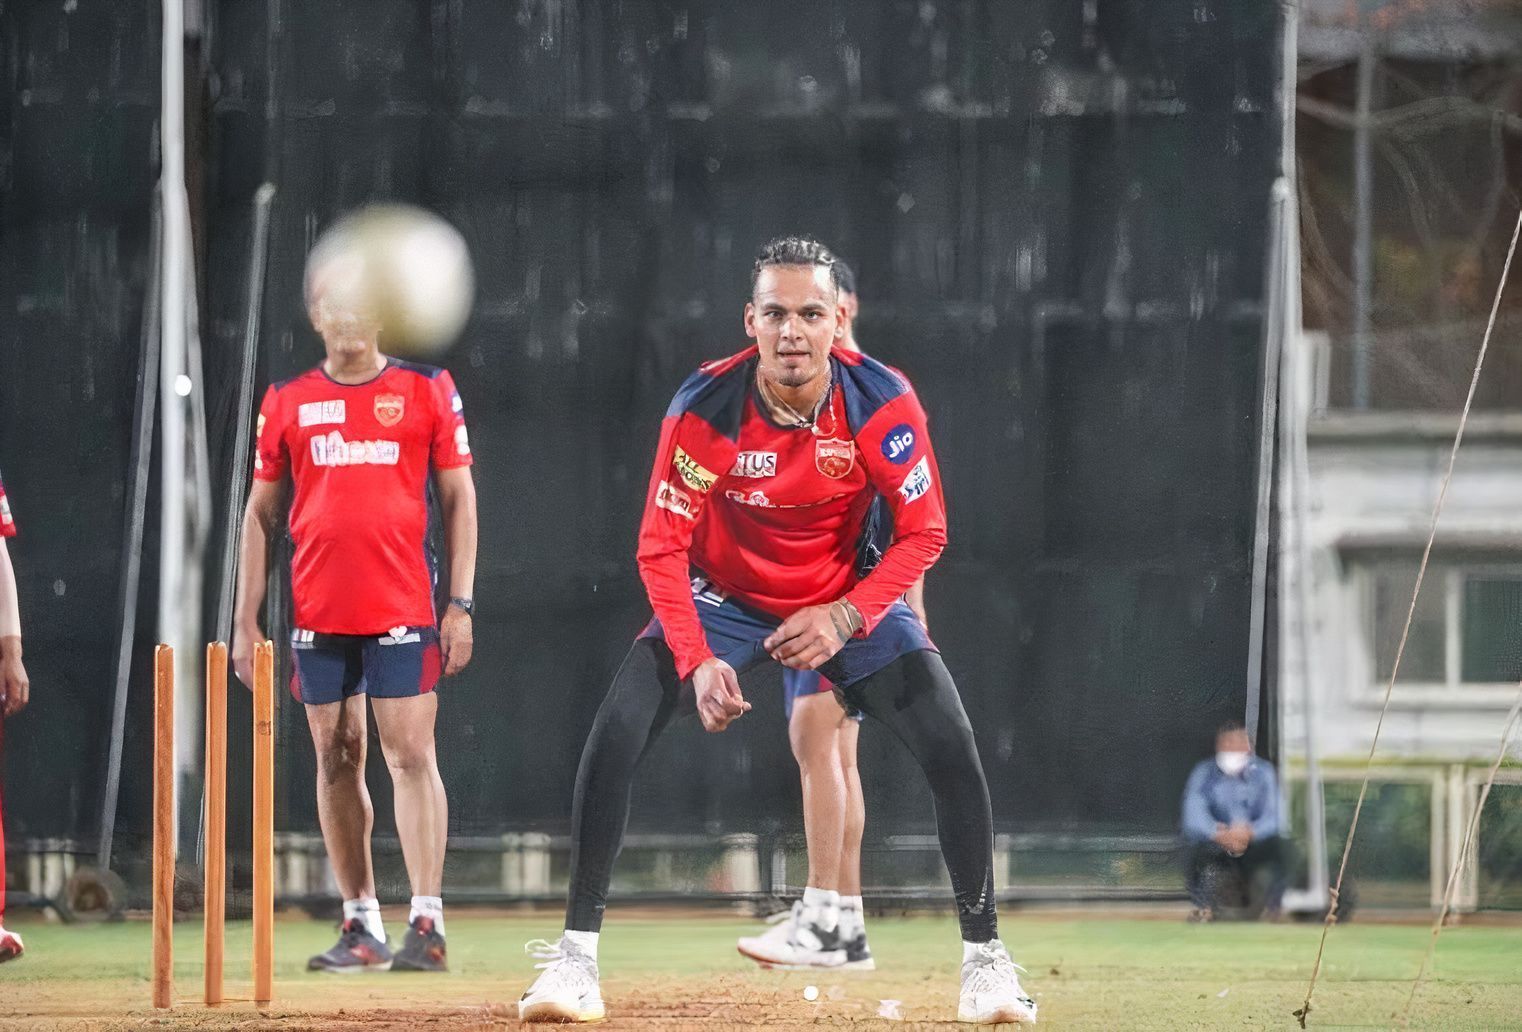 Rahul Chahar will lead the Punjab Kings spin attack for IPL 2022